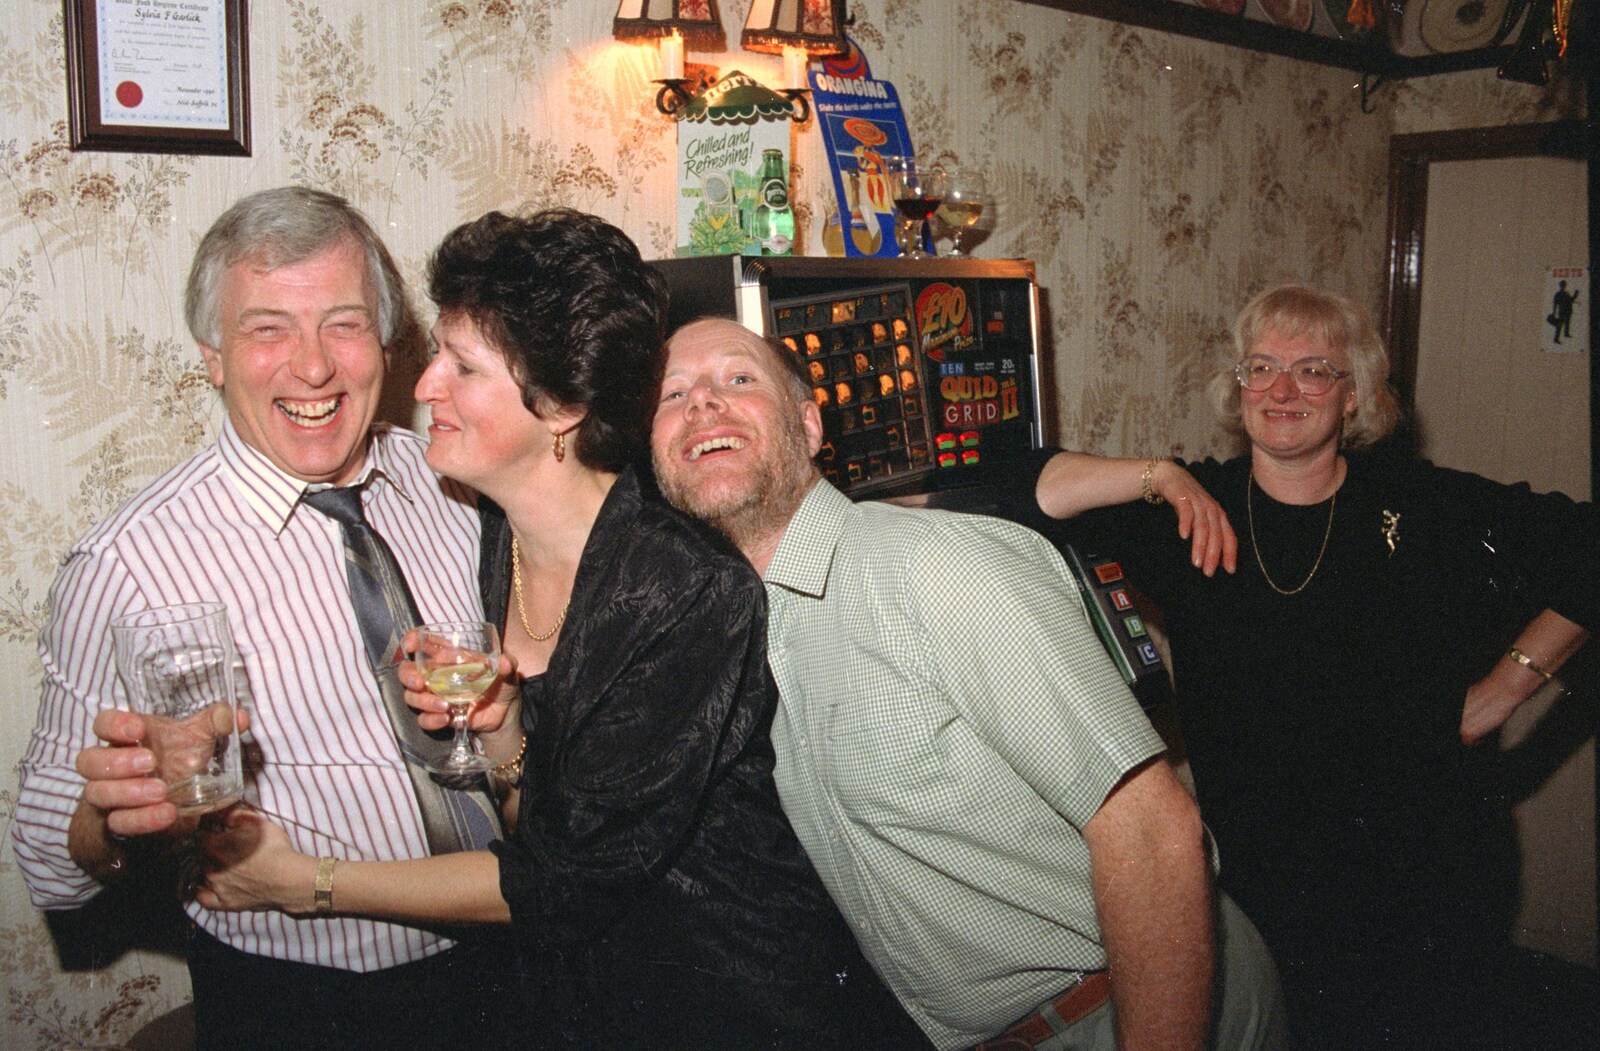 Colin, Jill and their chum Martin from New Year's Eve at the Swan Inn, Brome, Suffolk - 31st December 1991